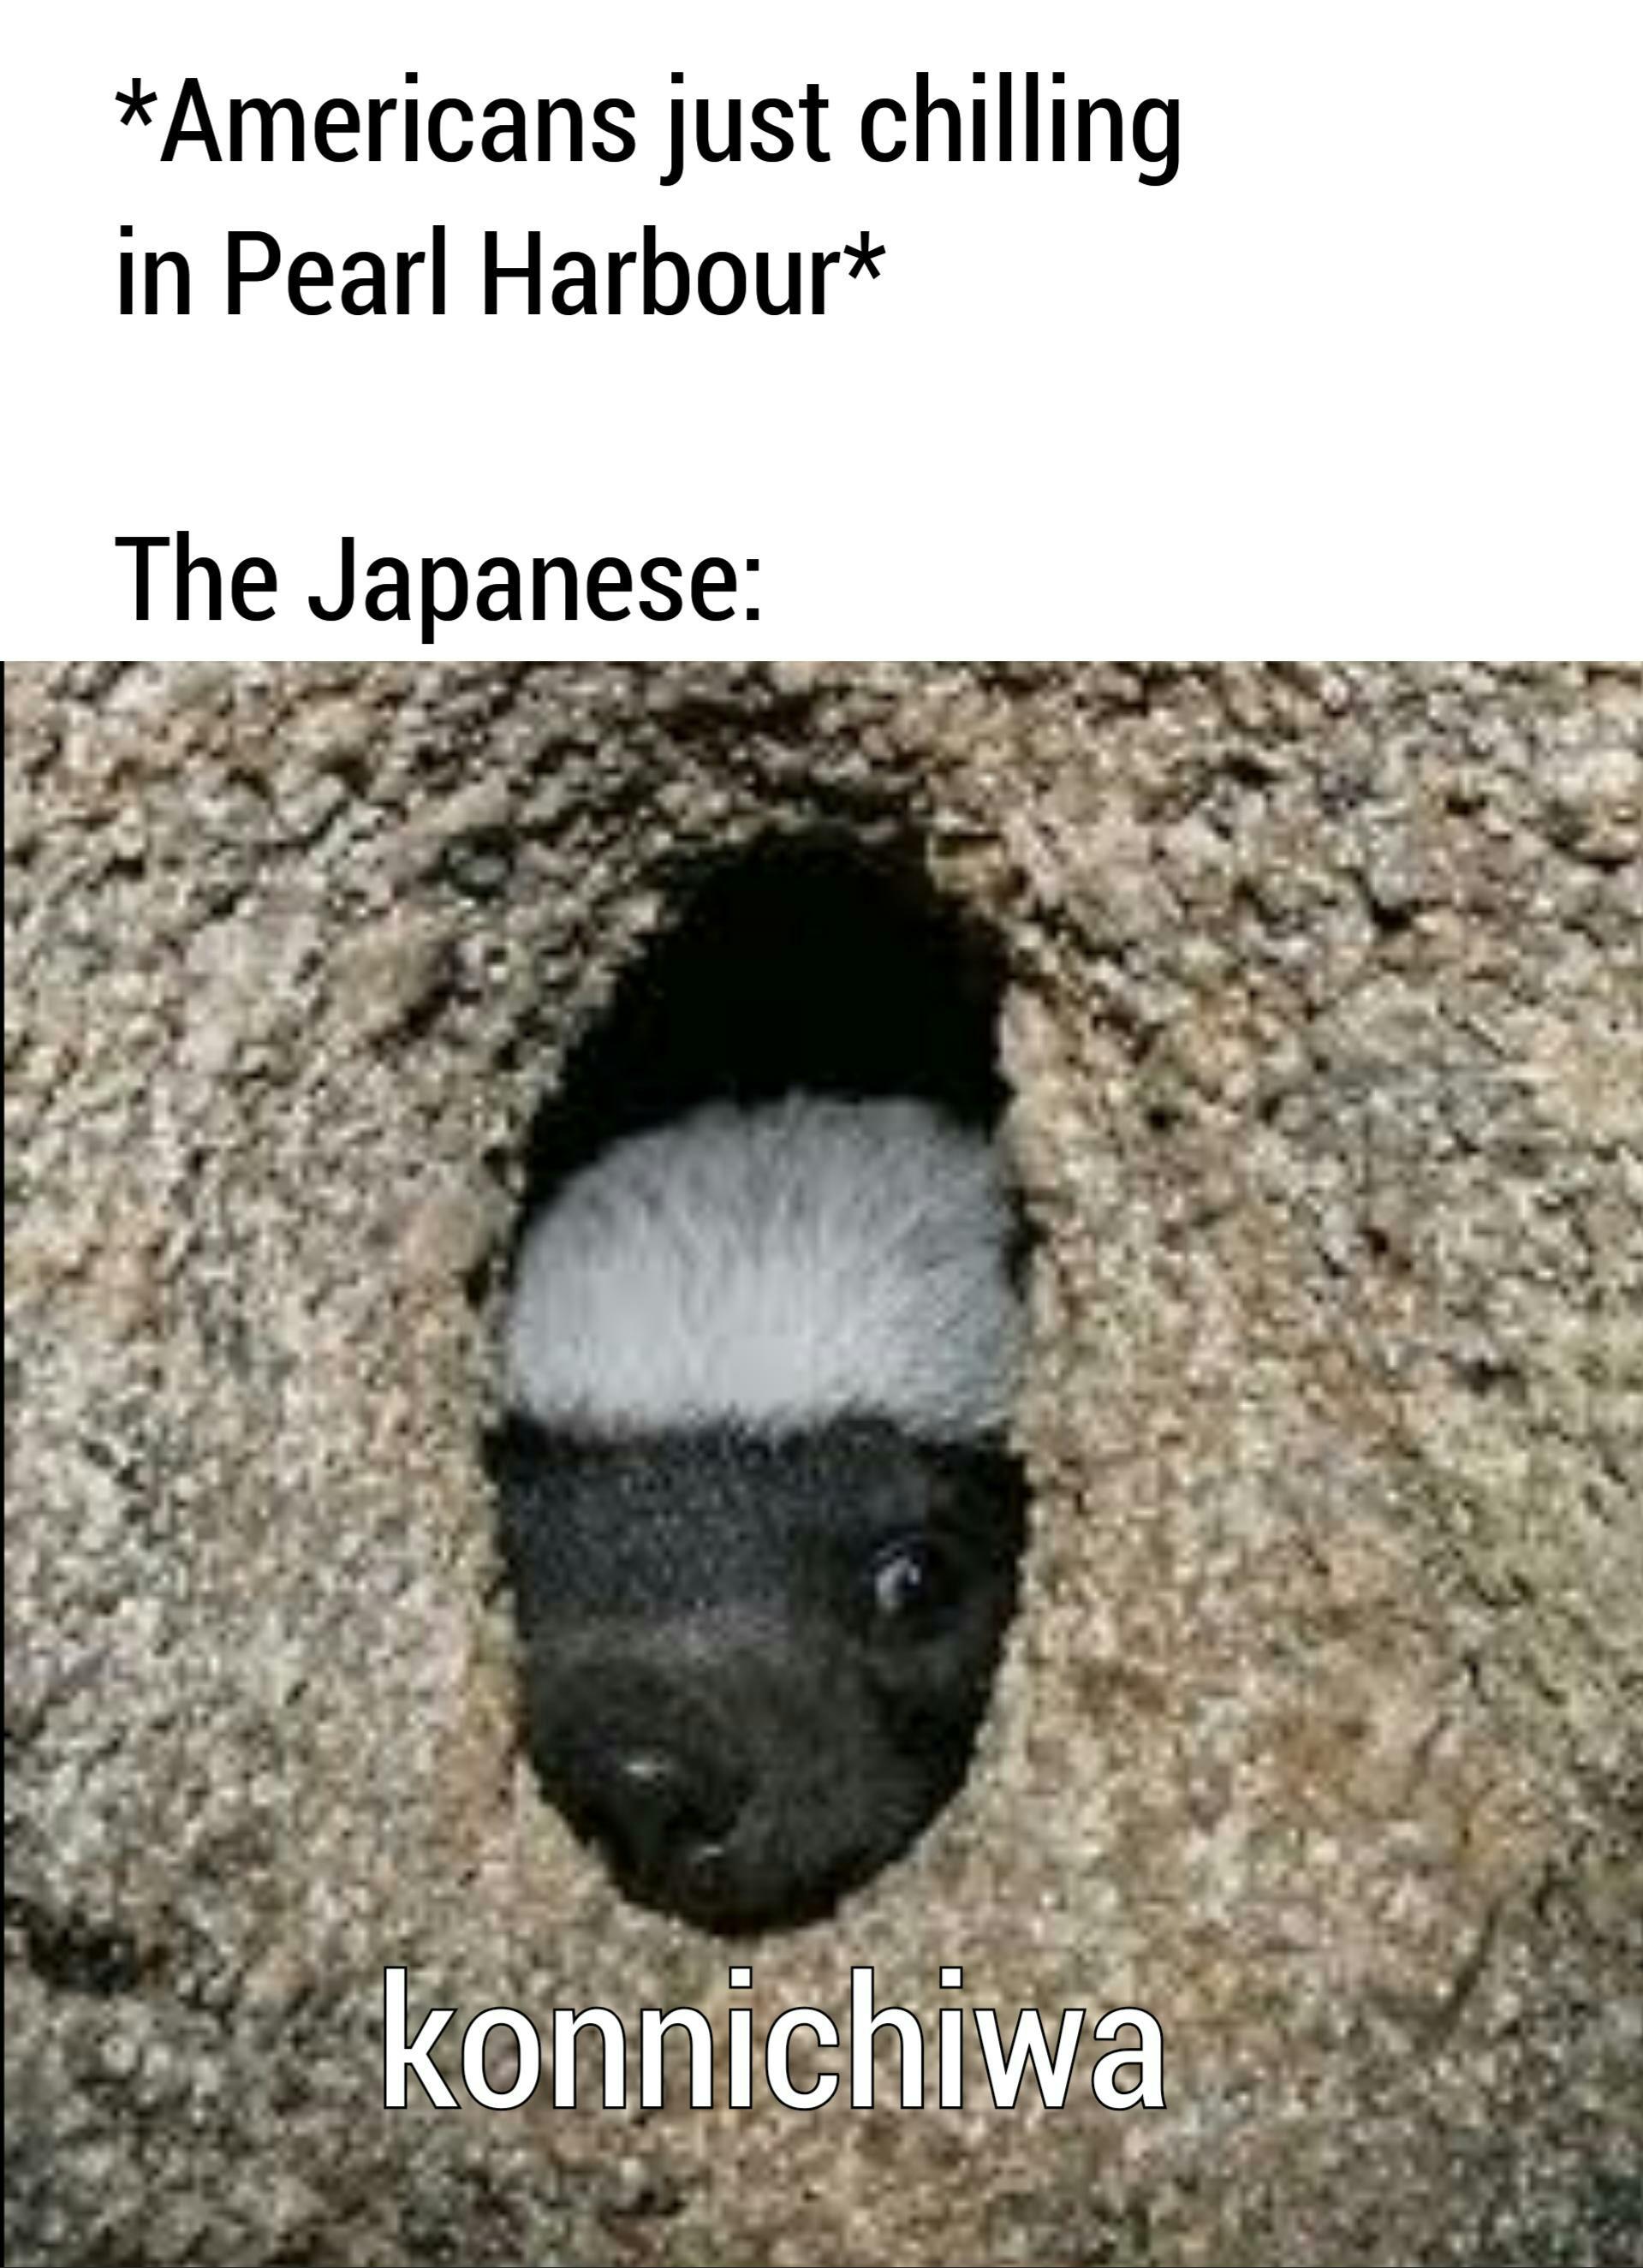 dank memes - honey badger - Americans just chilling in Pearl Harbour The Japanese konnichiwa